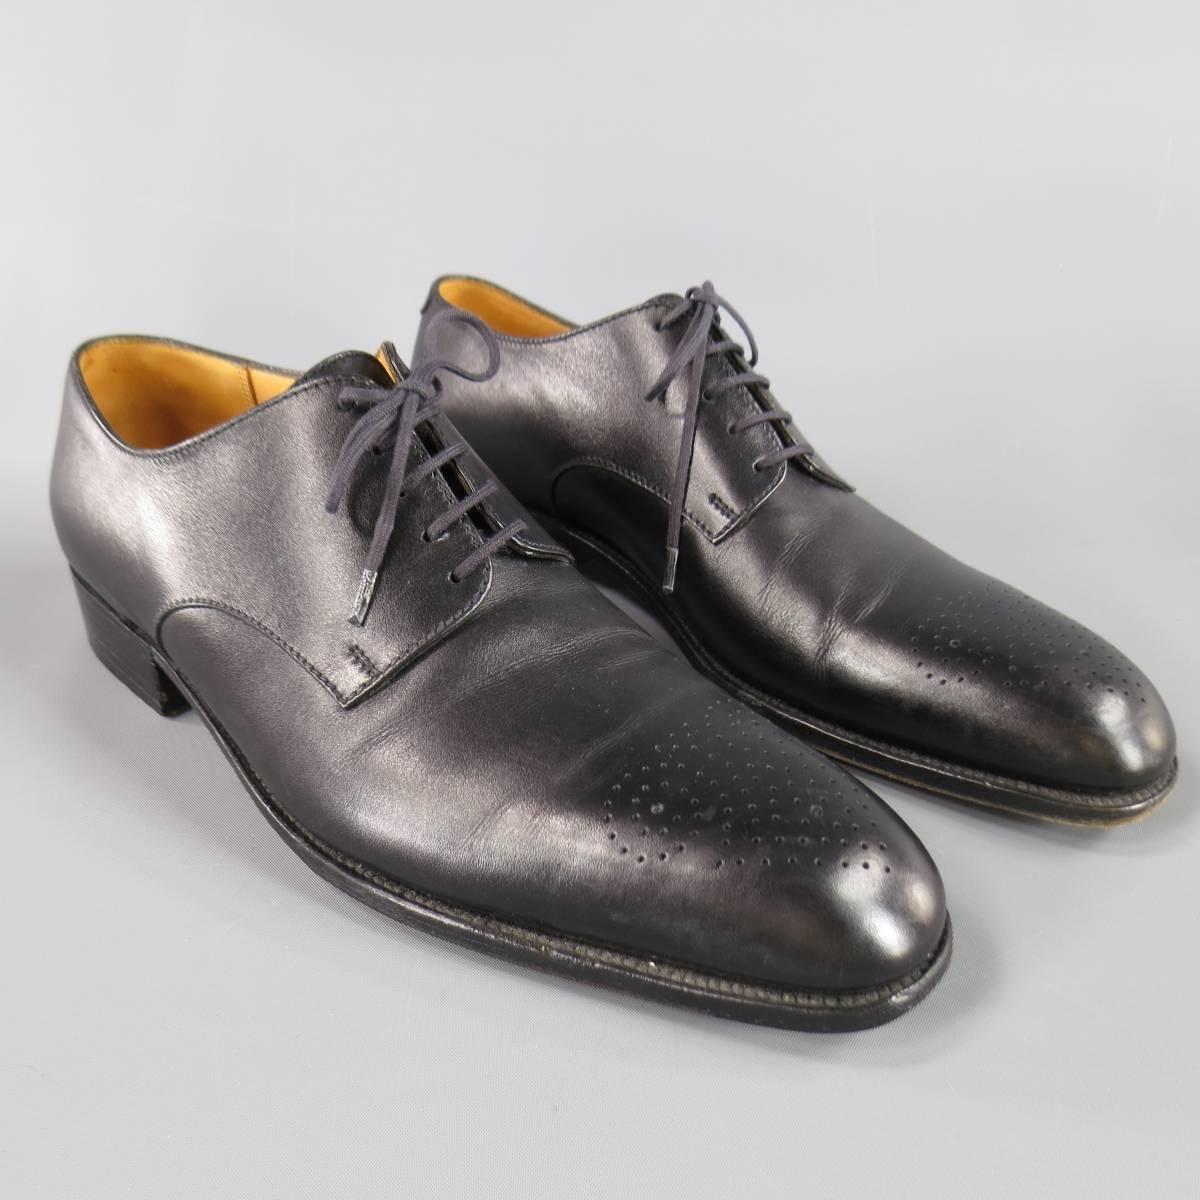 J.M. WESTON Lace-Up Shoes consists of leather material in a burgundy color tone. Designed in a round, perforated wingtip front and same tone laces. Detailed with black leather sole with heel. Comes with original box and shoe tree's. Made in